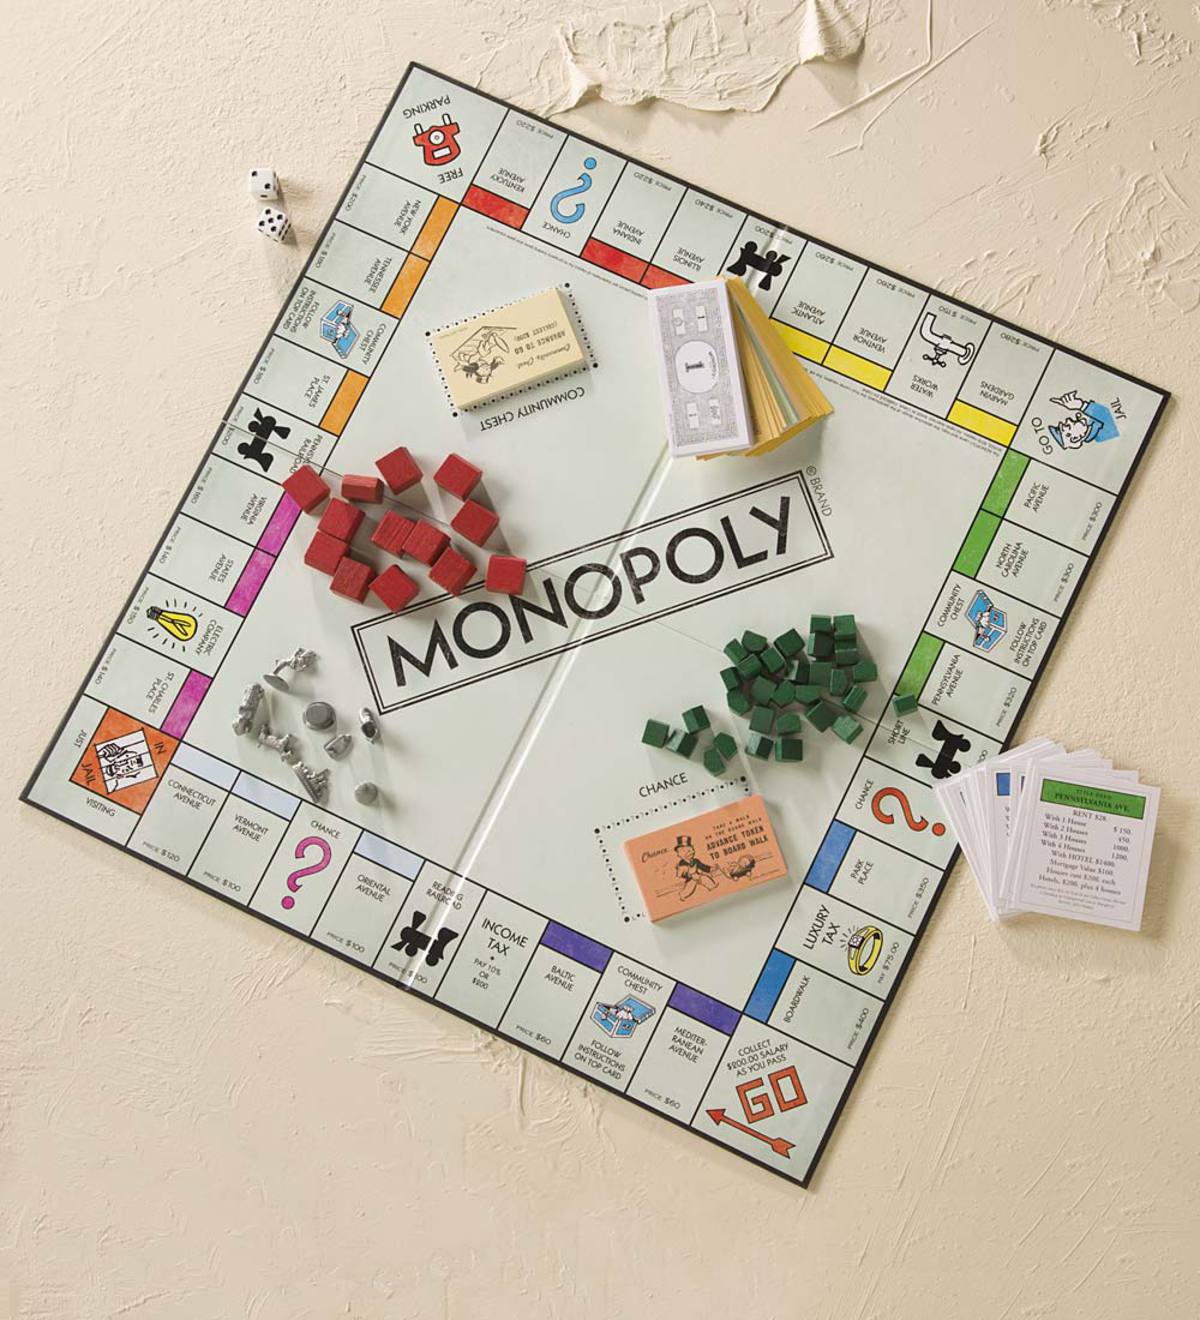 Classic Monopoly in Metal Box